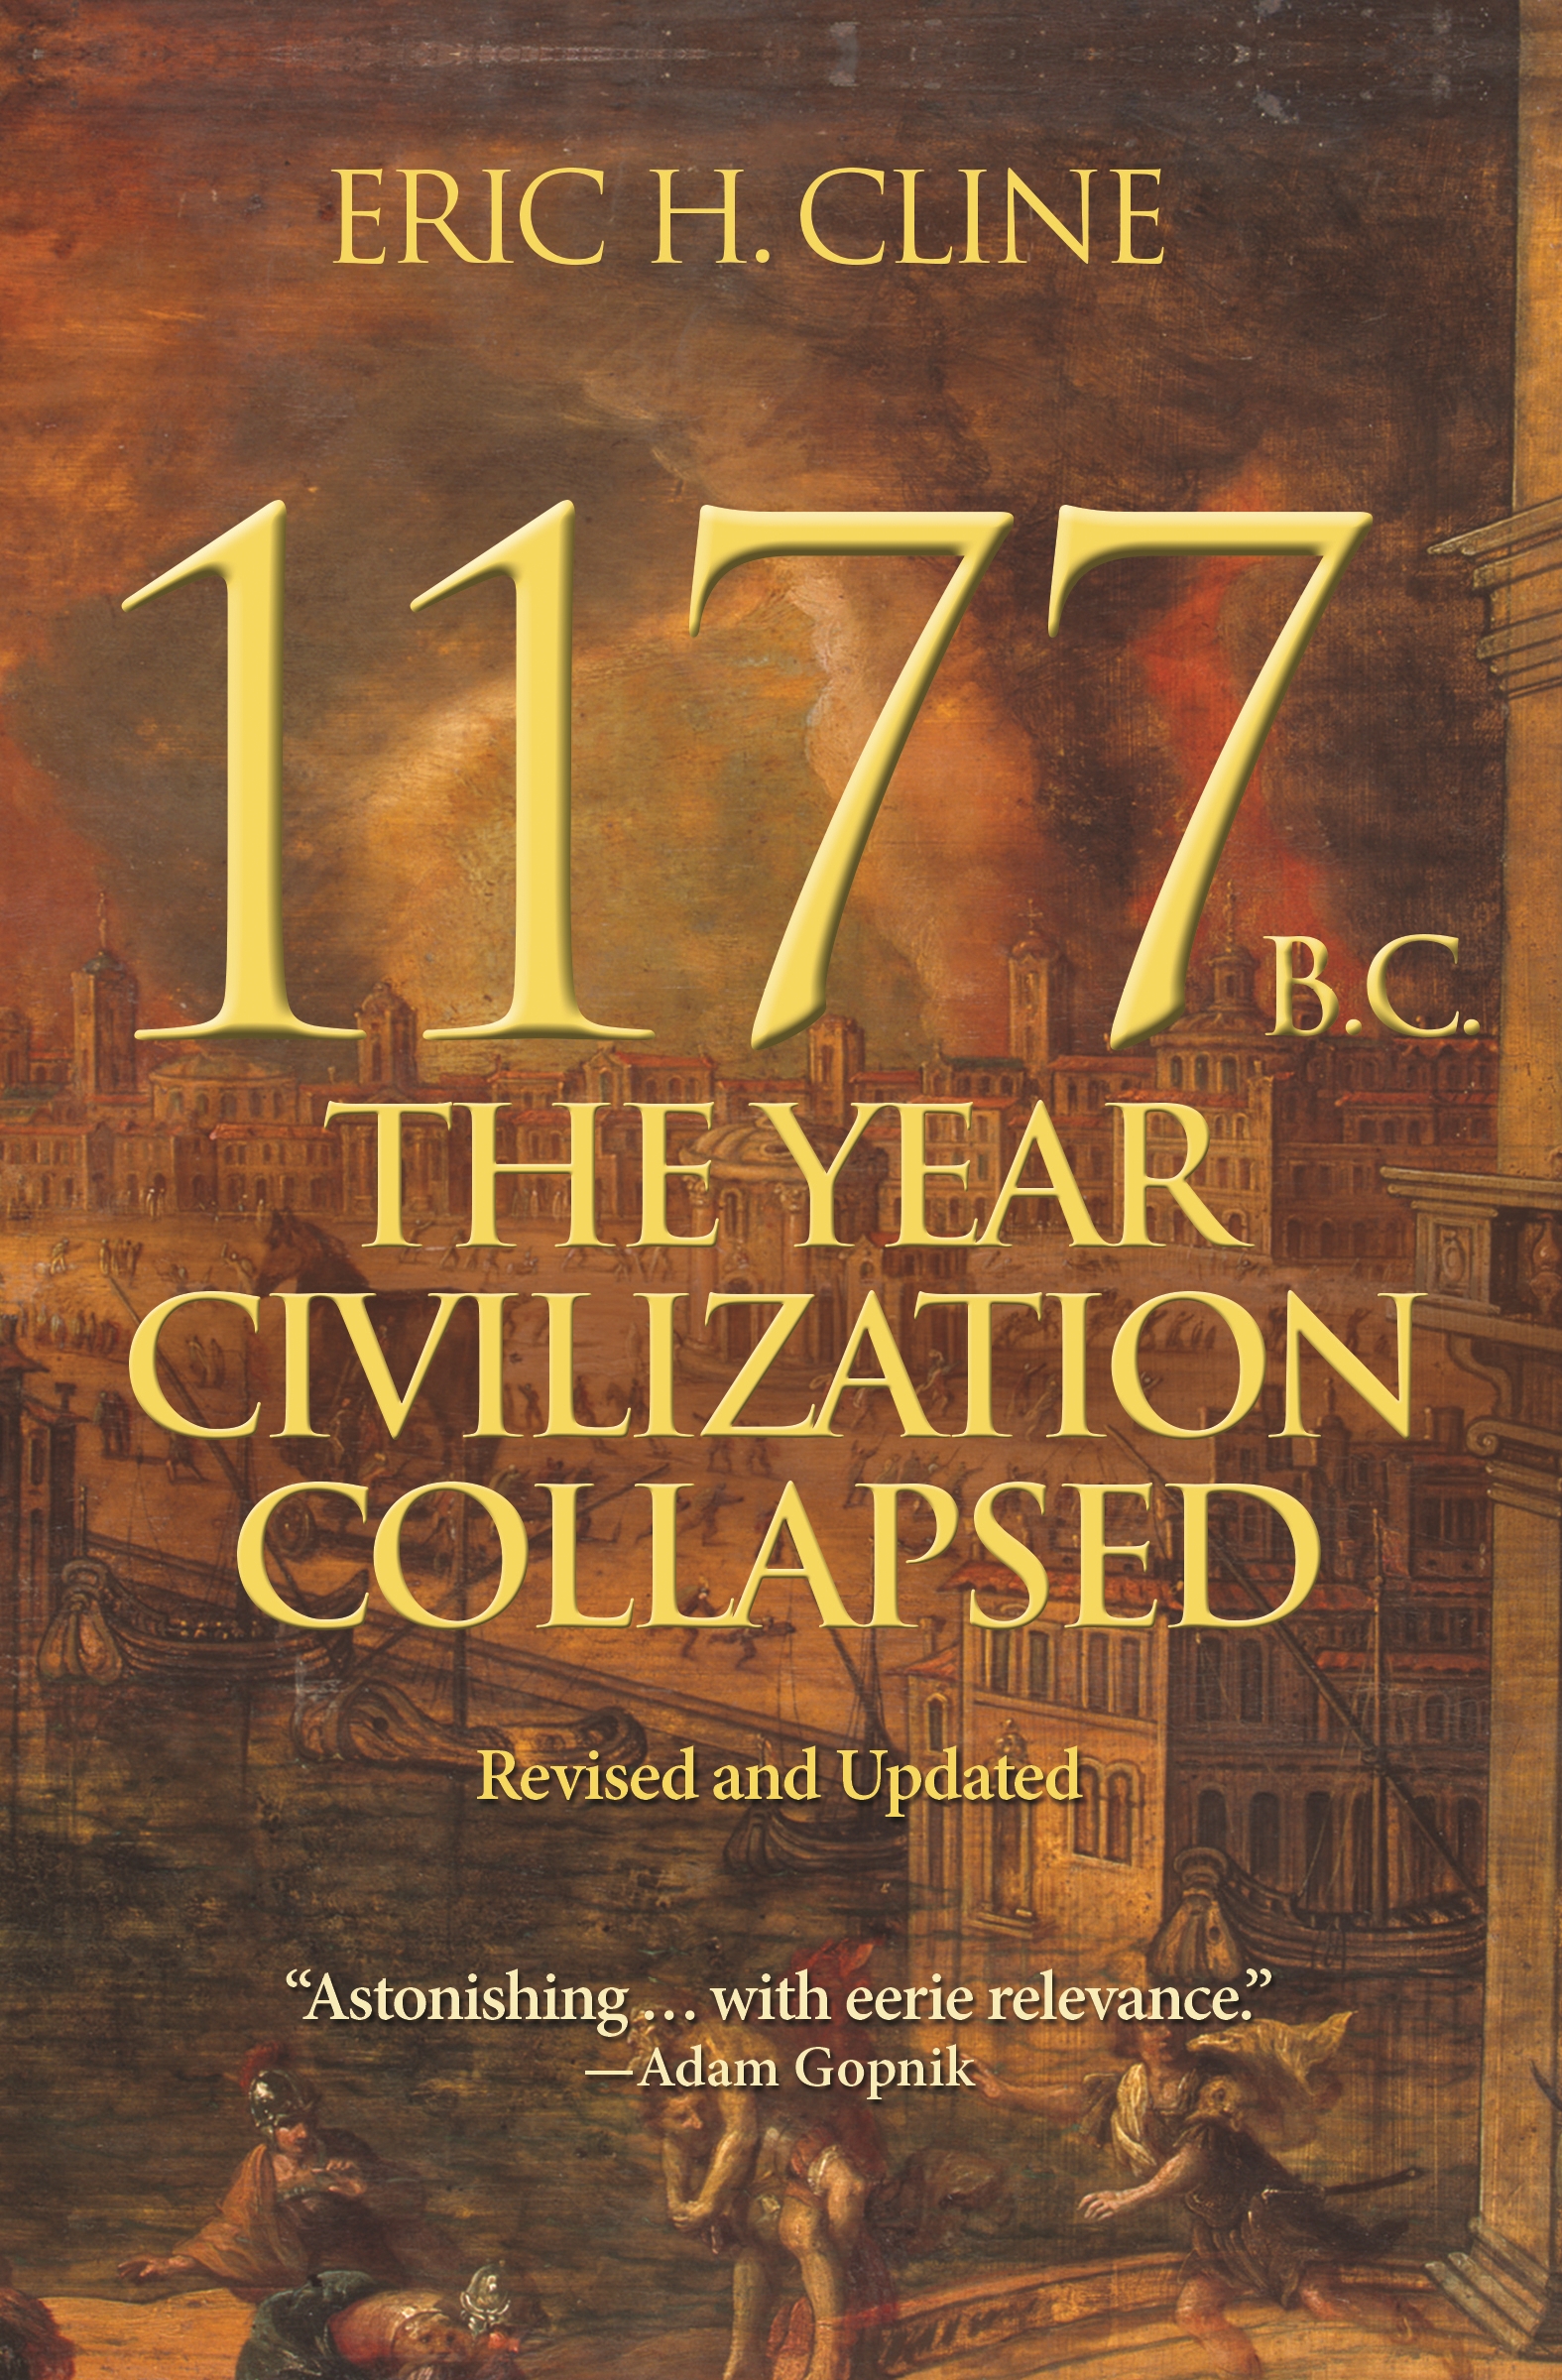 The Year Civilization Collapsed 1177 B.C. Turning Points in Ancient History